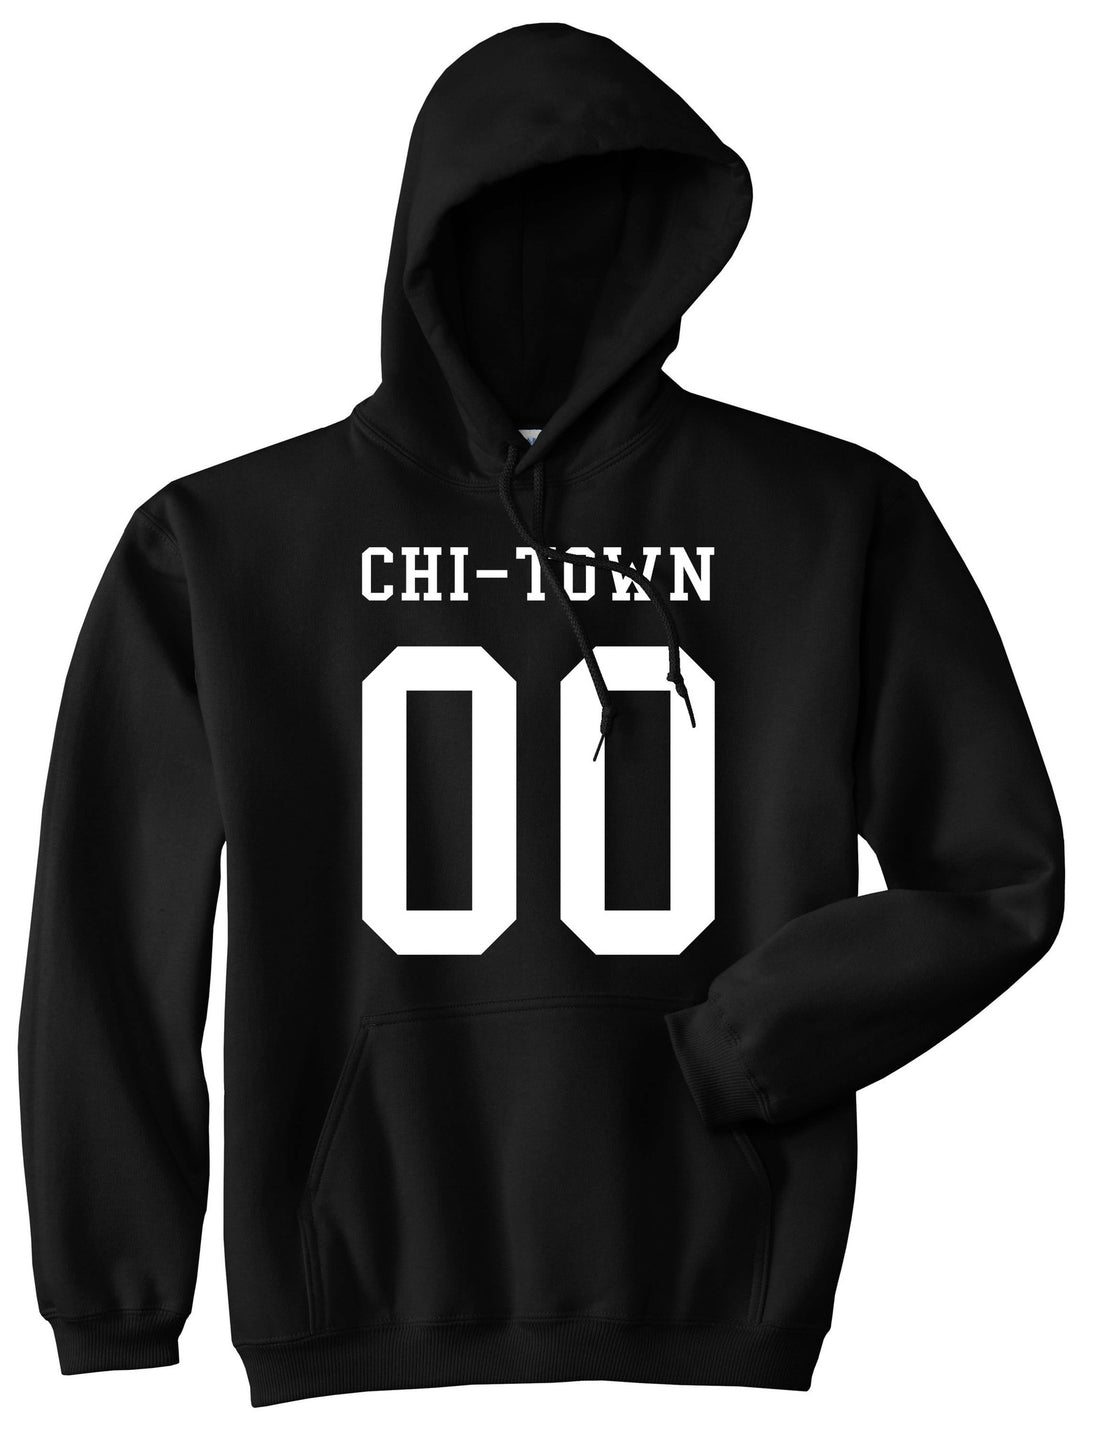 Chitown Team 00 Chicago Jersey Pullover Hoodie in Black By Kings Of NY